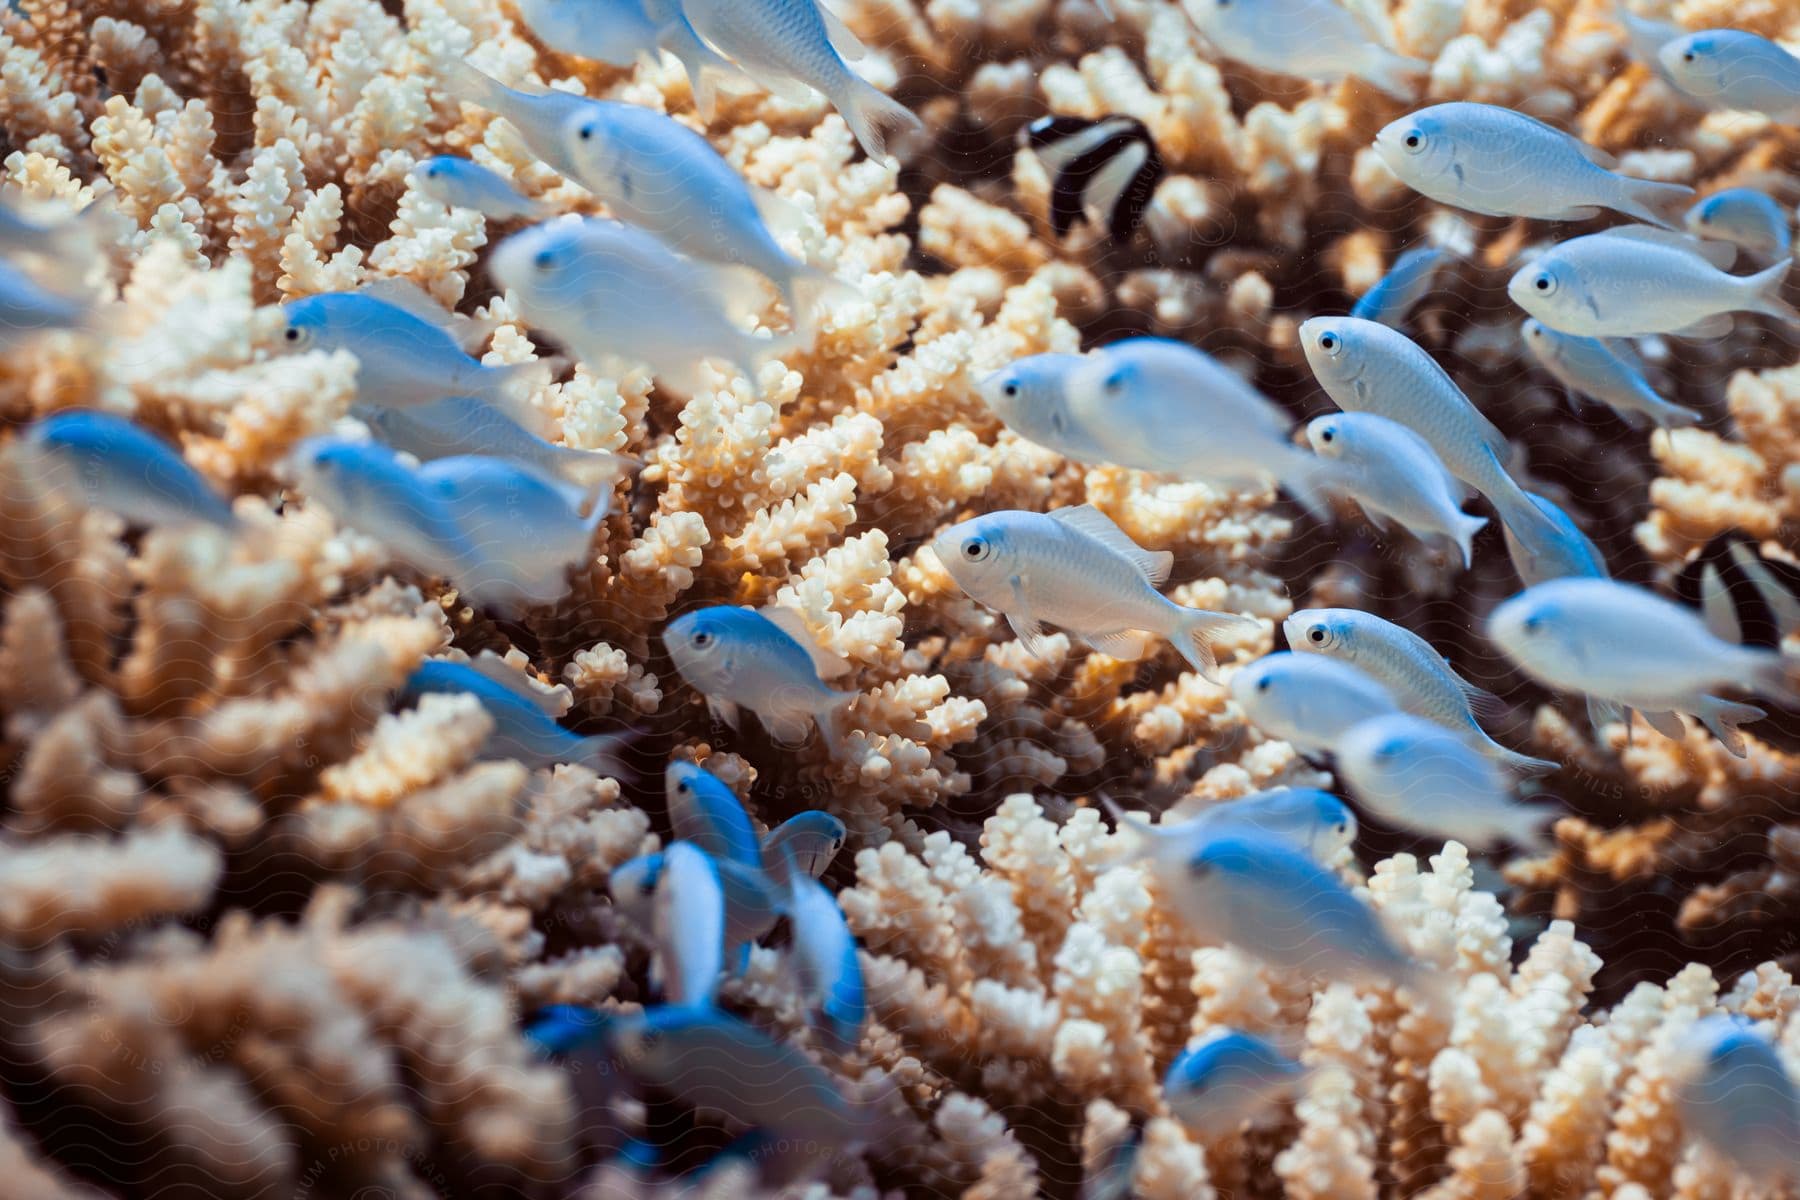 Underwater marine life in a coral reef